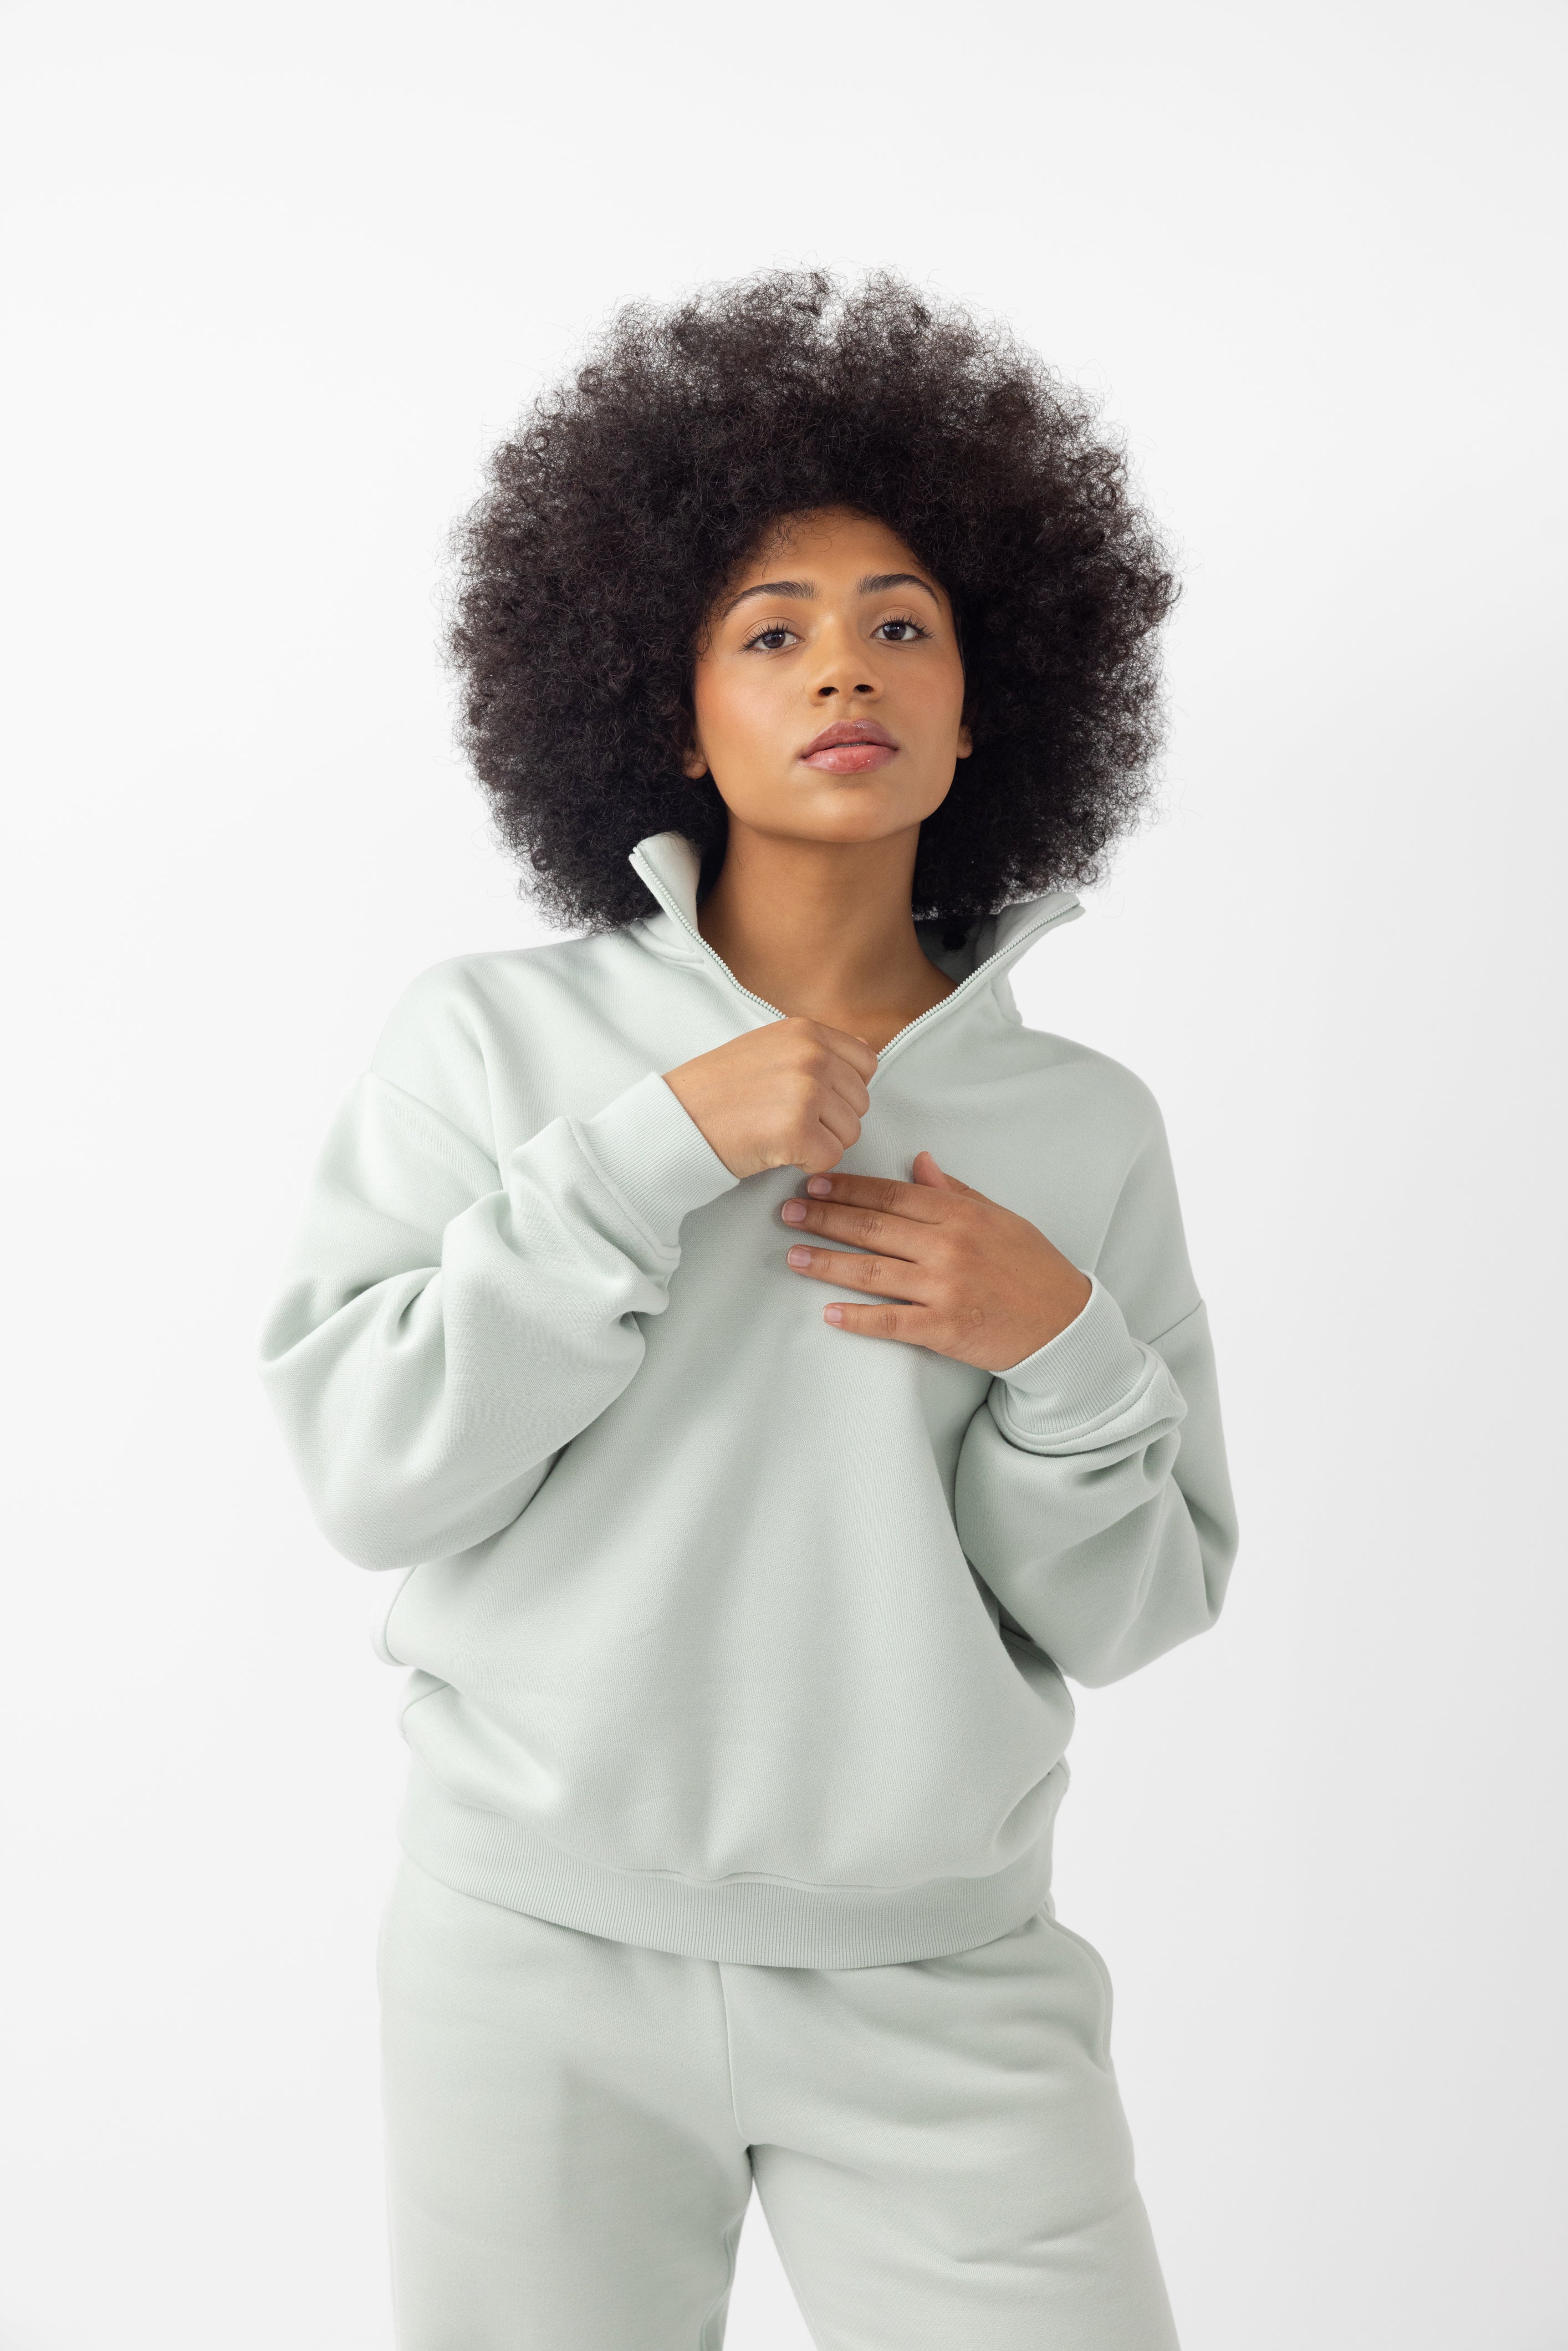 Arctic CityScape Quarter Zip. The quarter zip is being worn by a female model. The model is wearing accompanying CityScape clothing to complete the look of the quarter zip. The photo was taken with a white background. |Color:Arctic